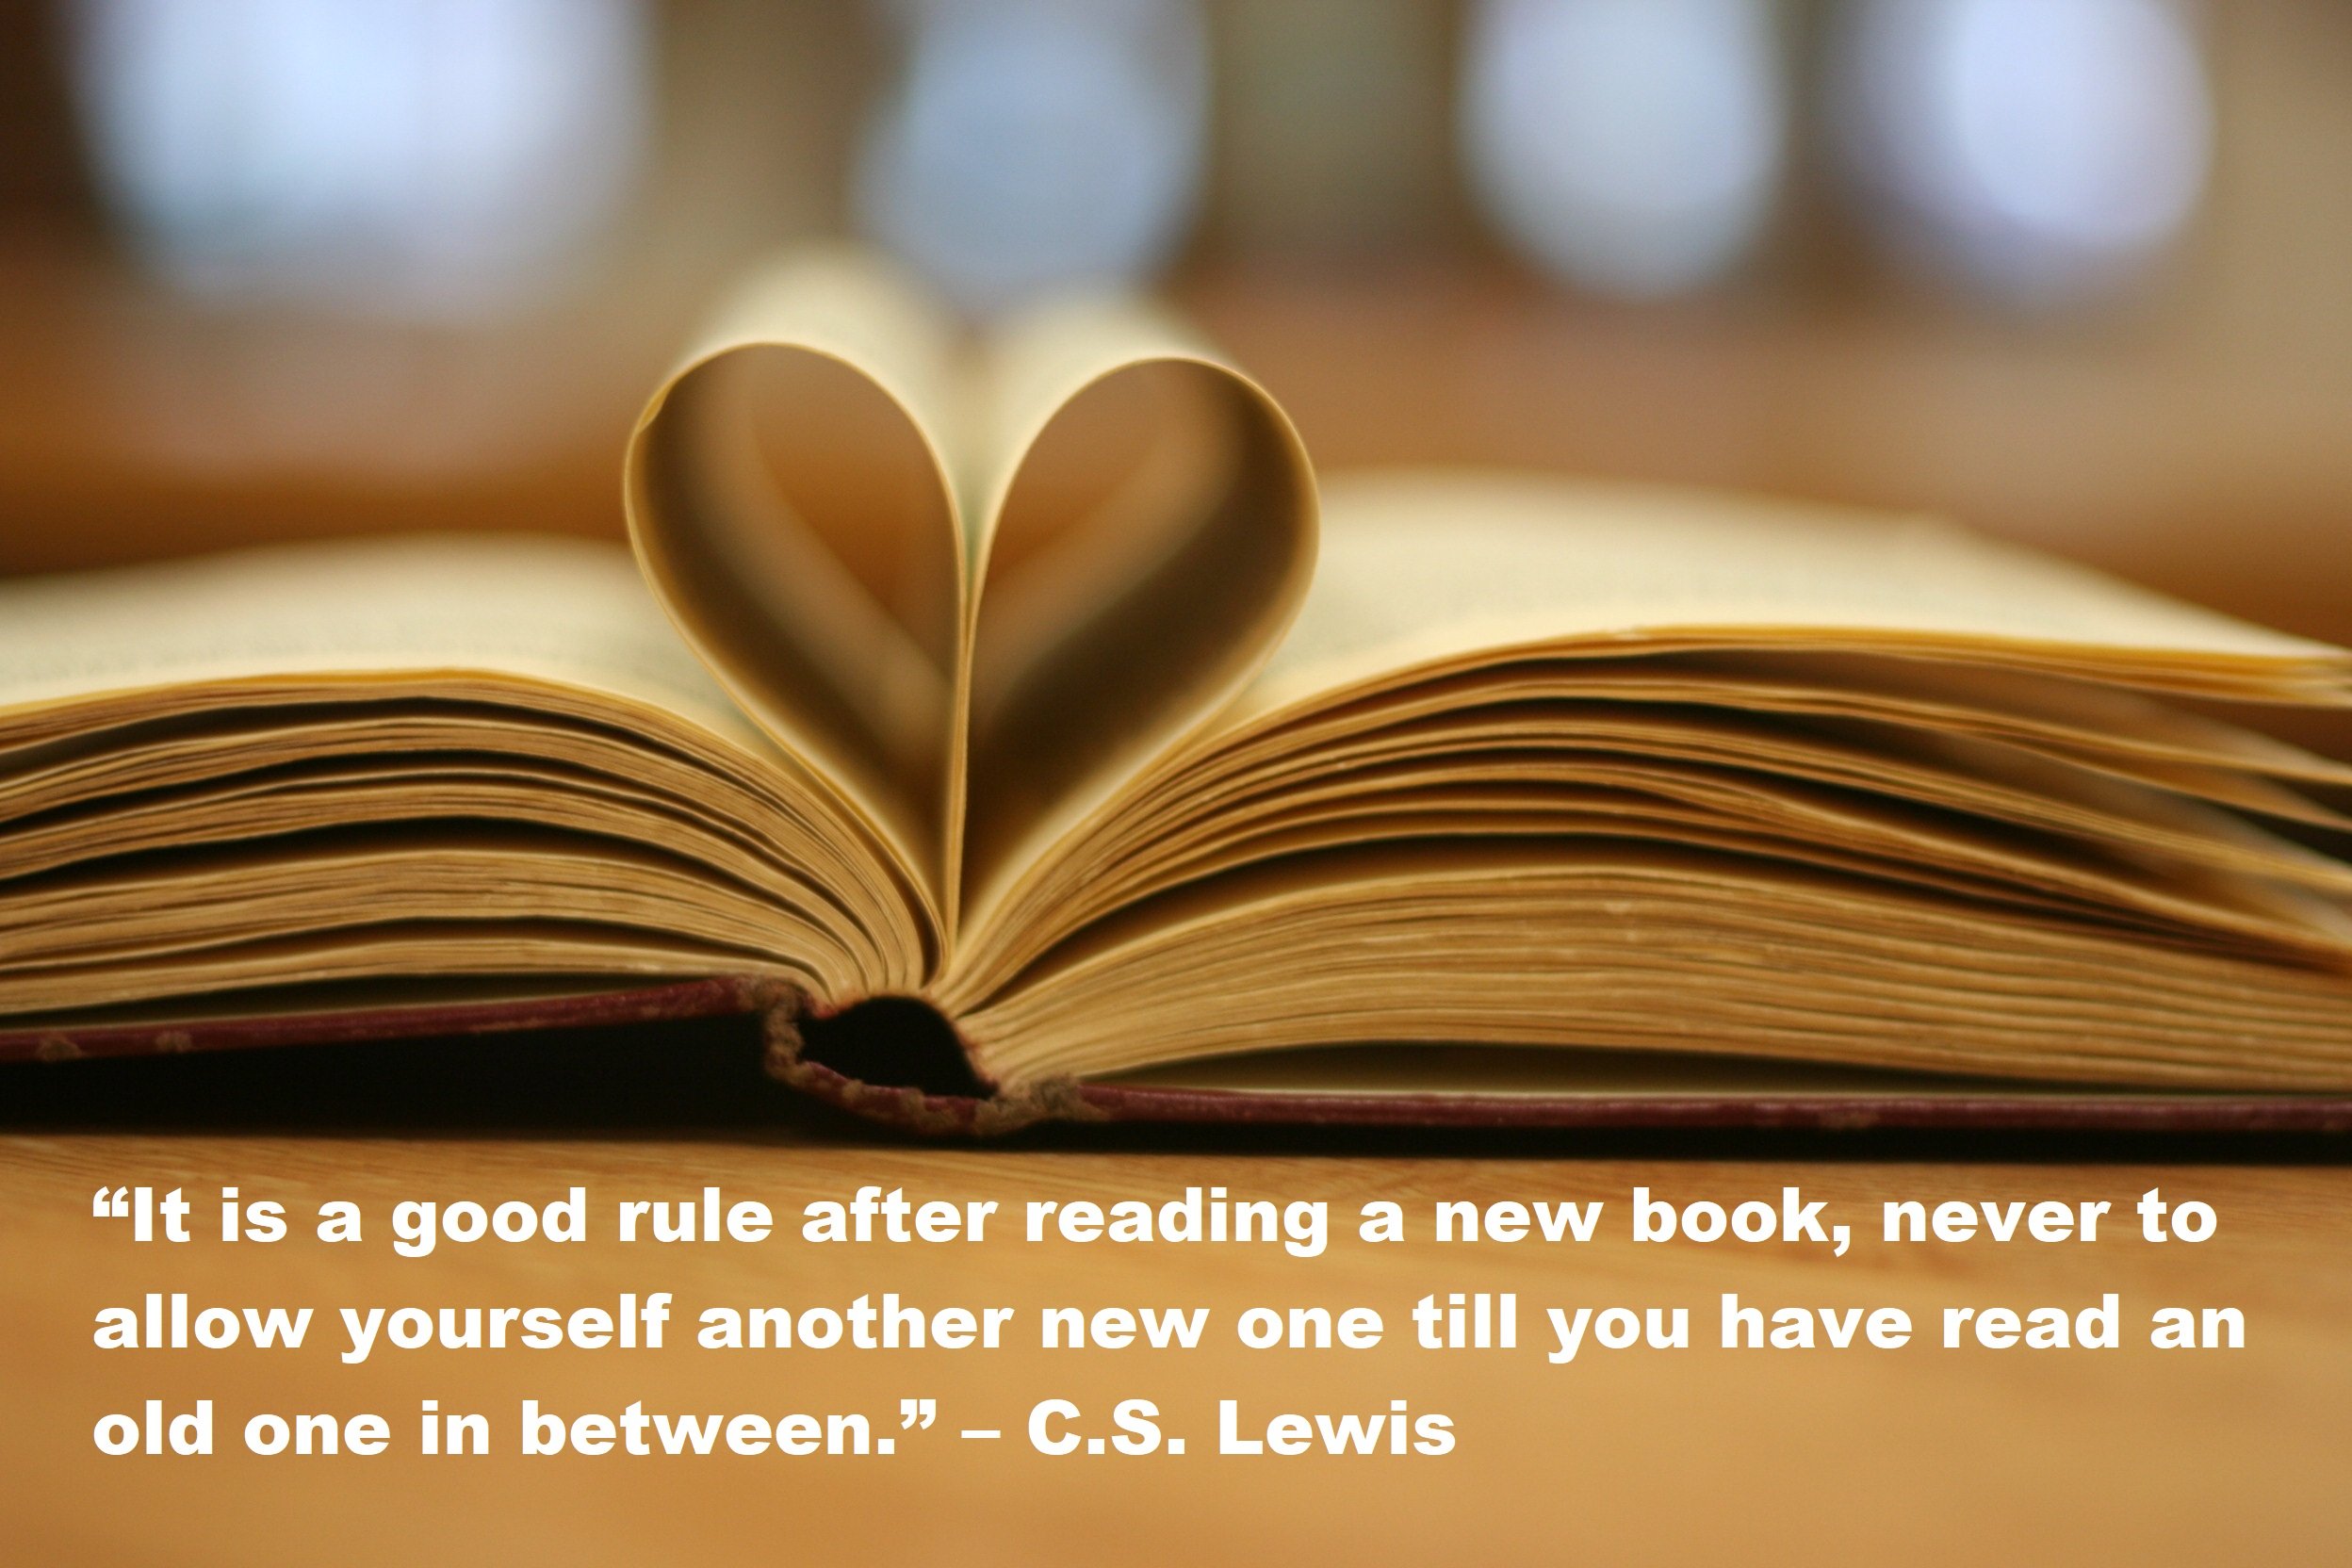 Quotes About Books and Reading